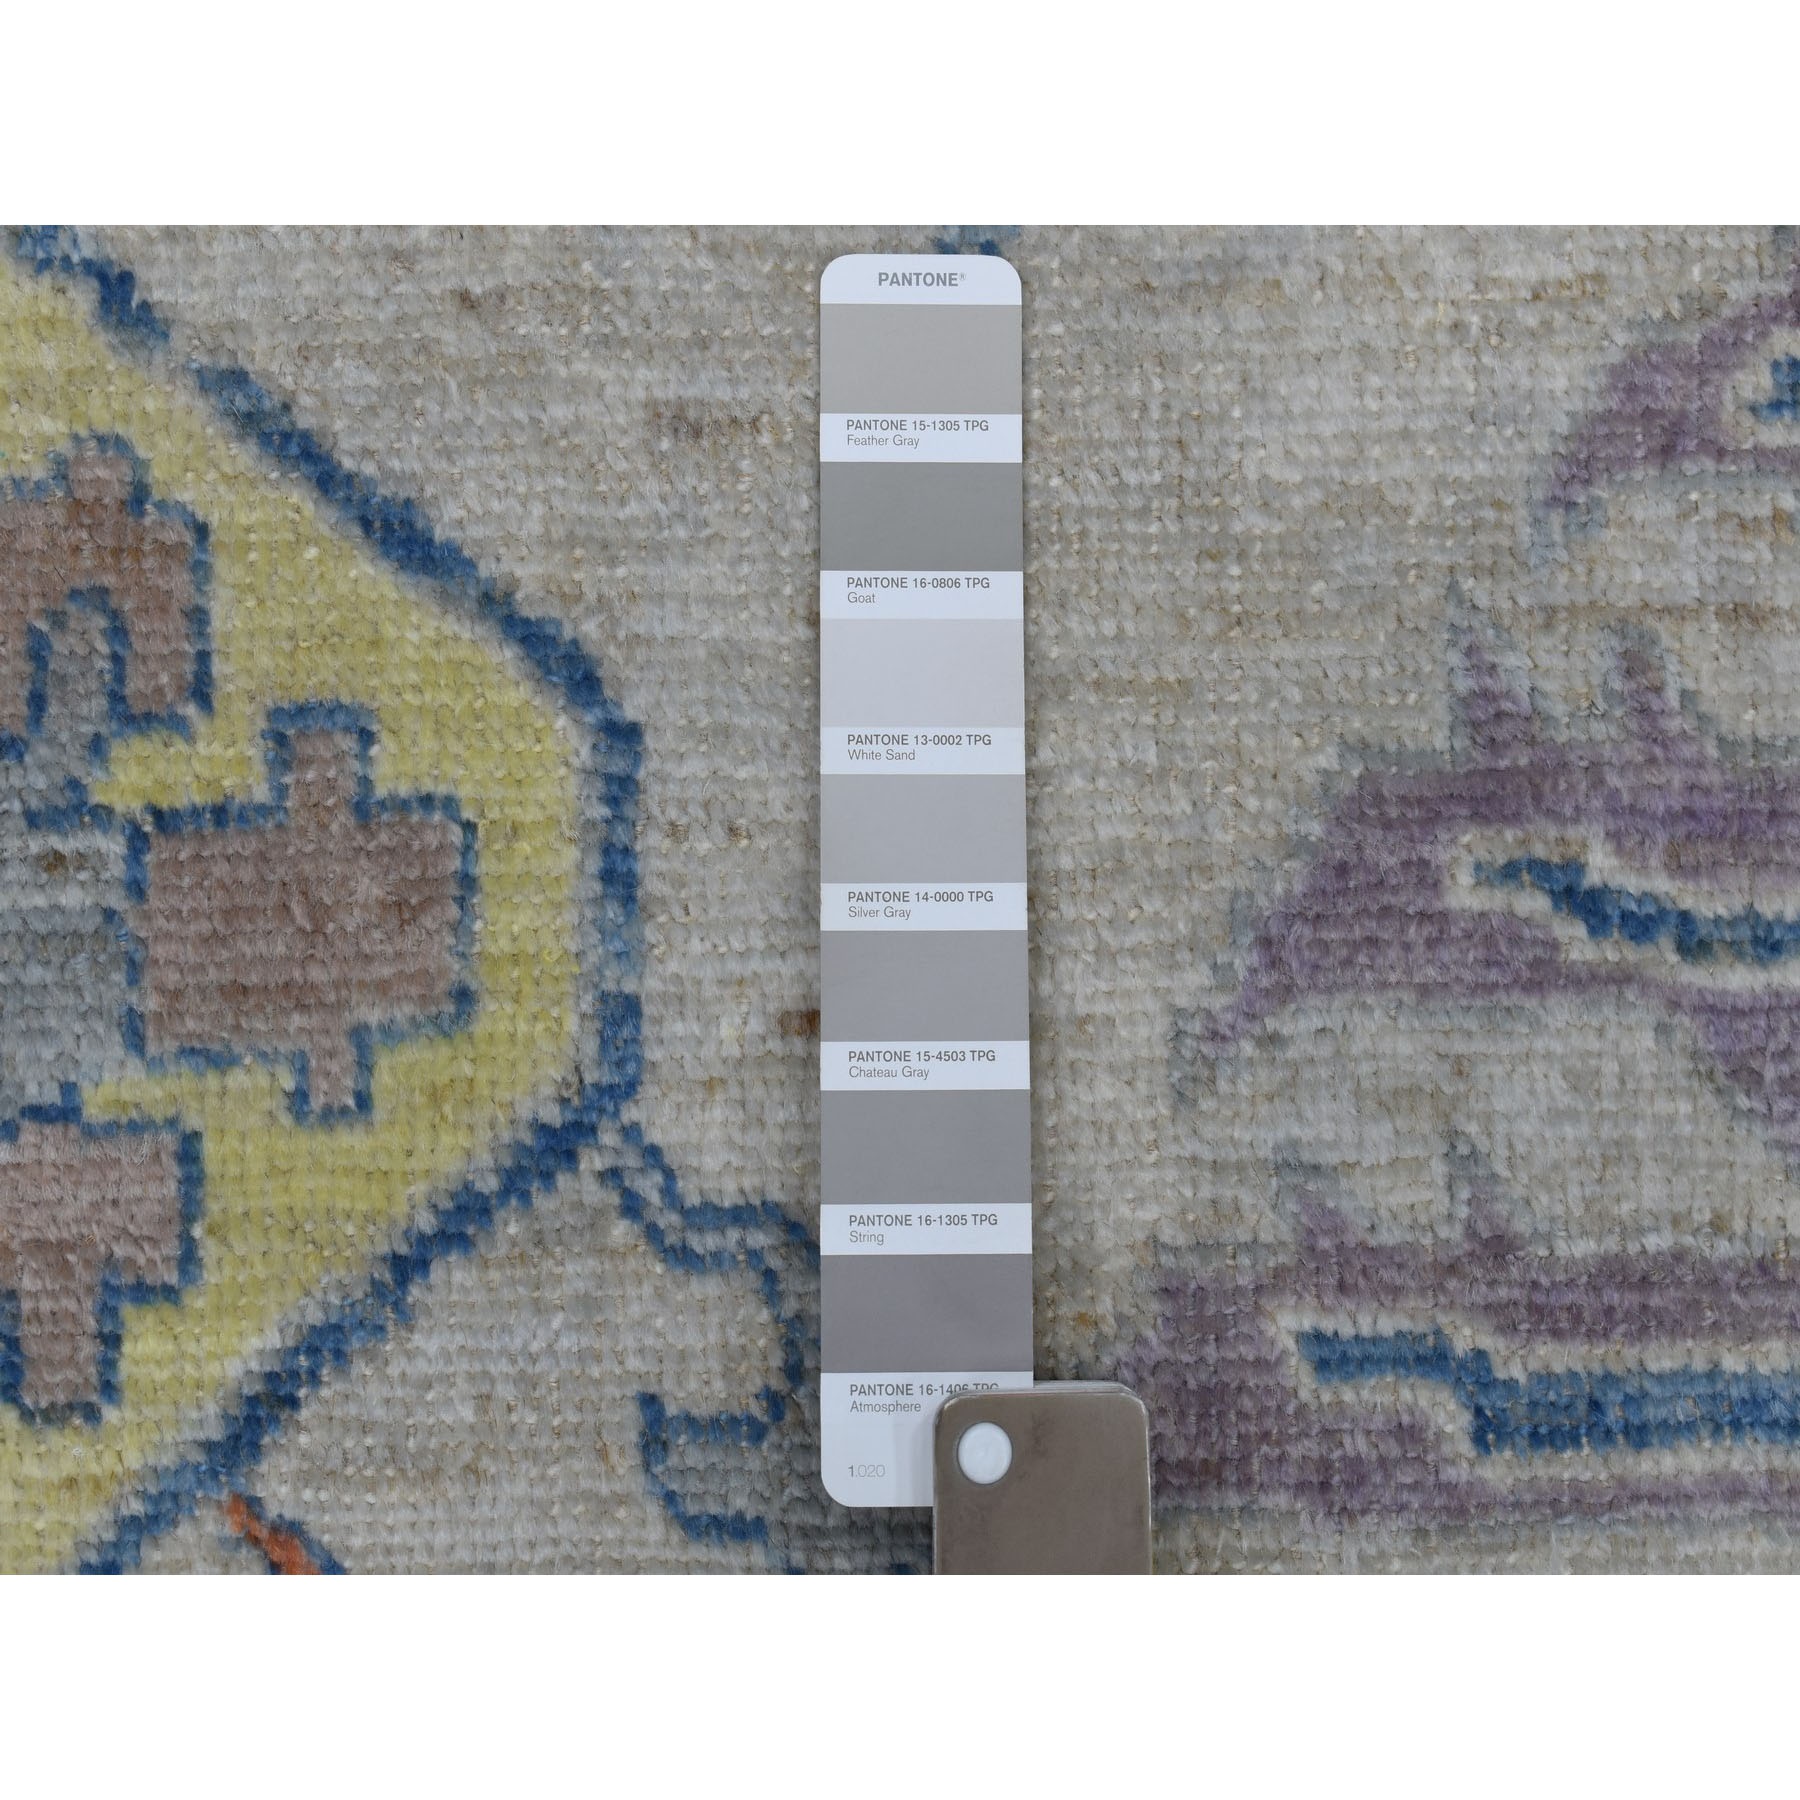 10-2 x13-7  Angora Oushak Soft Velvety Wool With pop OF Color Hand Knotted Oriental Rug 